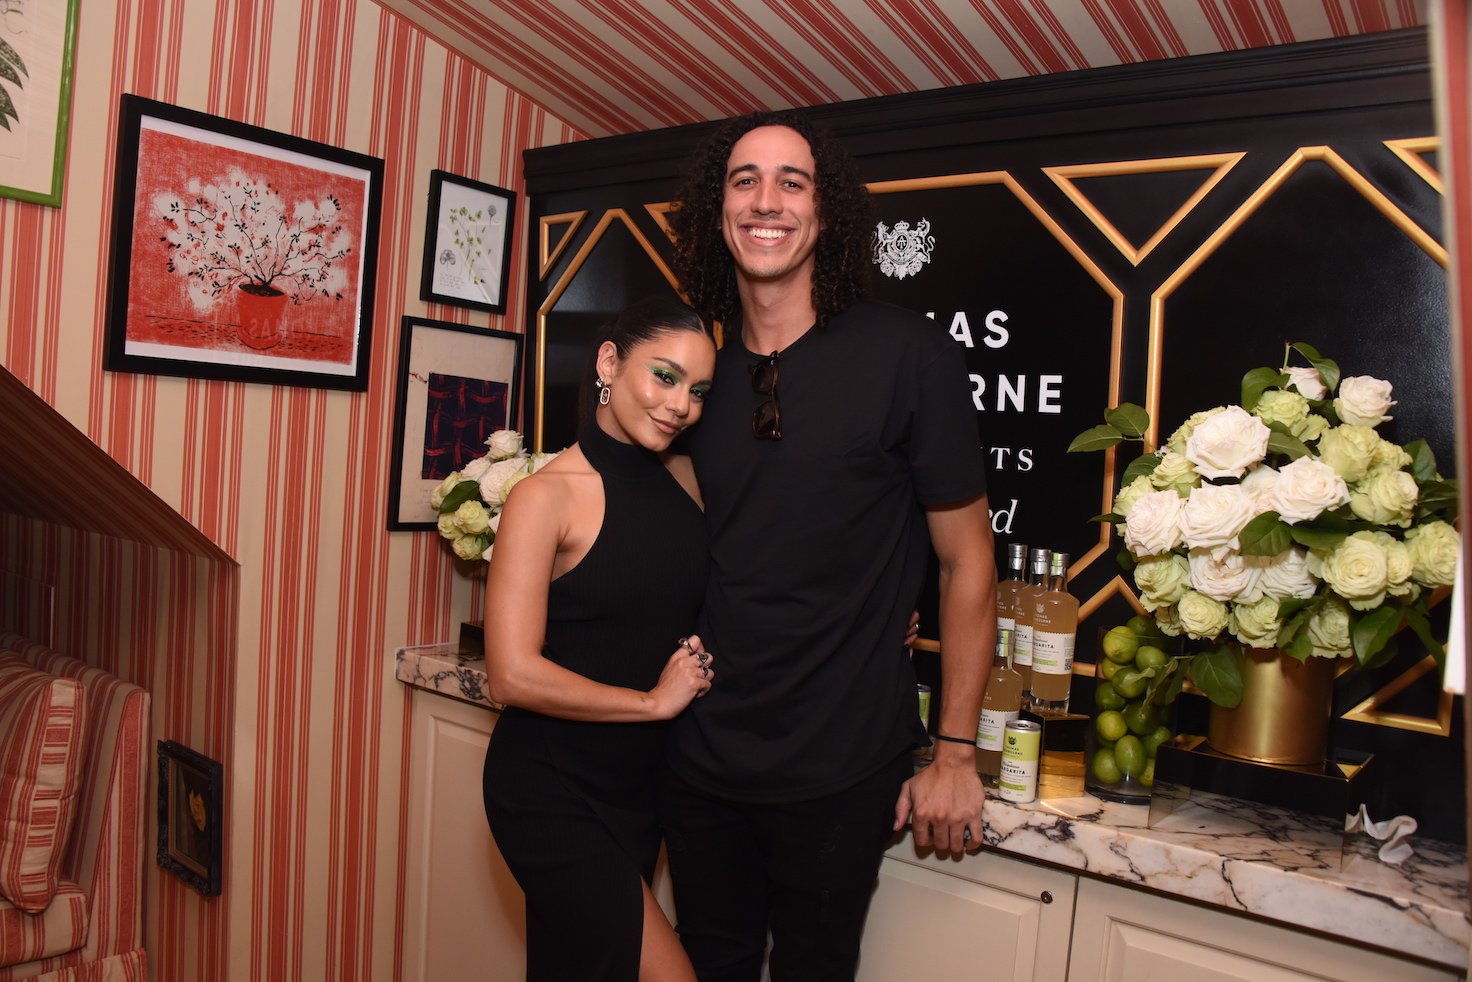 Vanessa Hudgens and Cole Tucker standing with their arms around each other